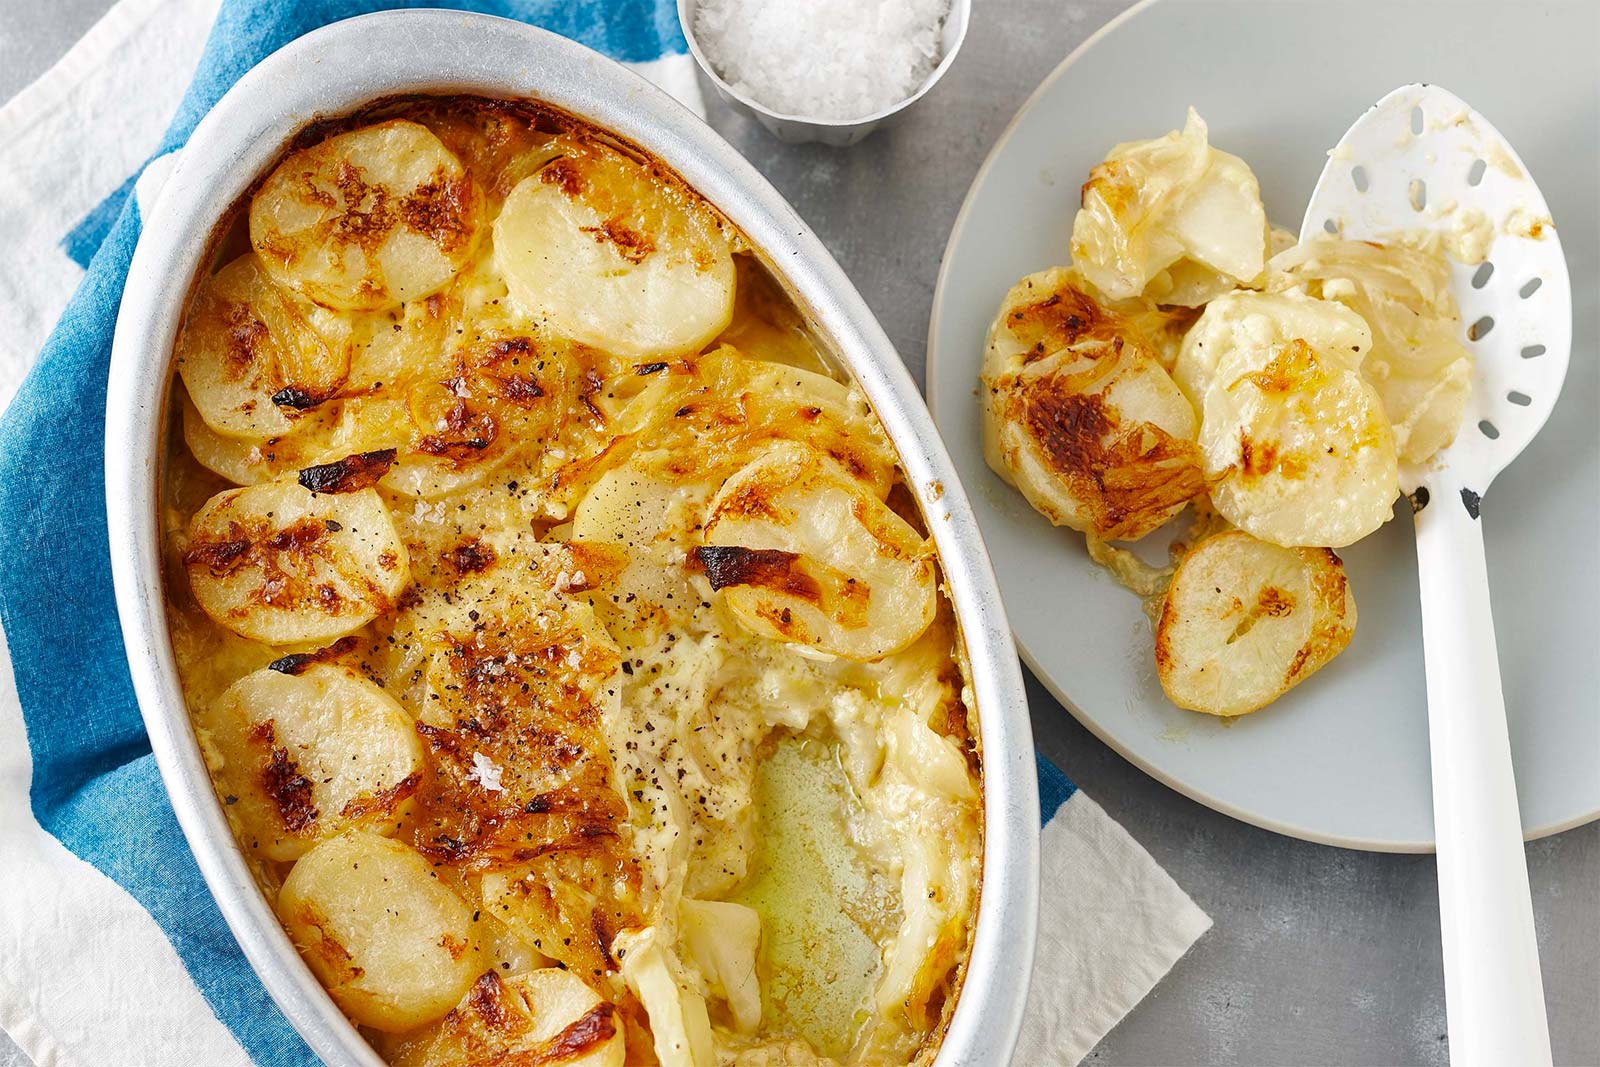 🍟 Believe It or Not, We Can Guess Your Age Just by How You Rate These Potato Dishes Scalloped Potatoes